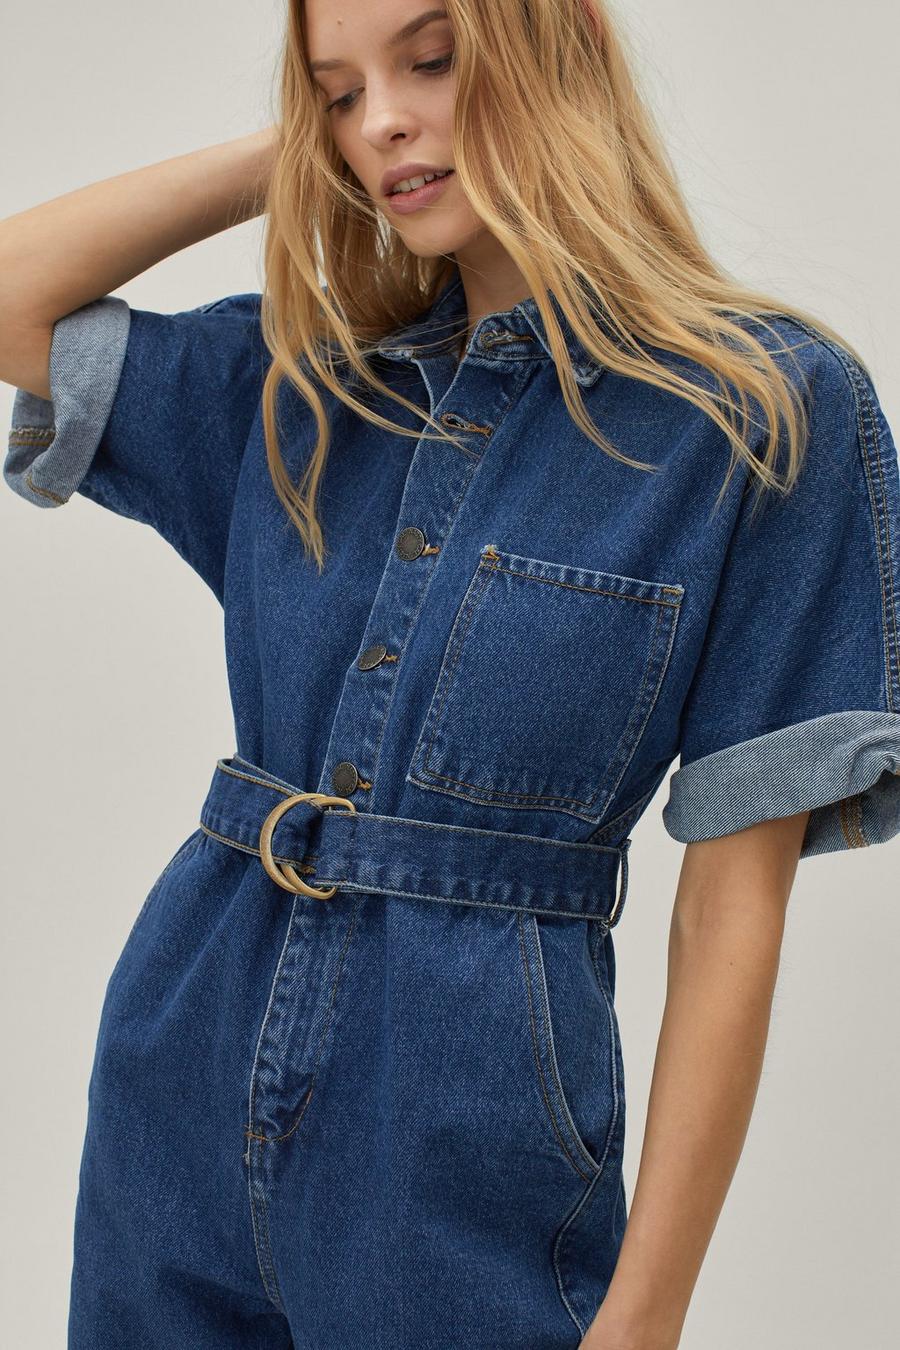 Sale Jumpsuits | Cheap Jumpsuits & Rompers | Nasty Gal